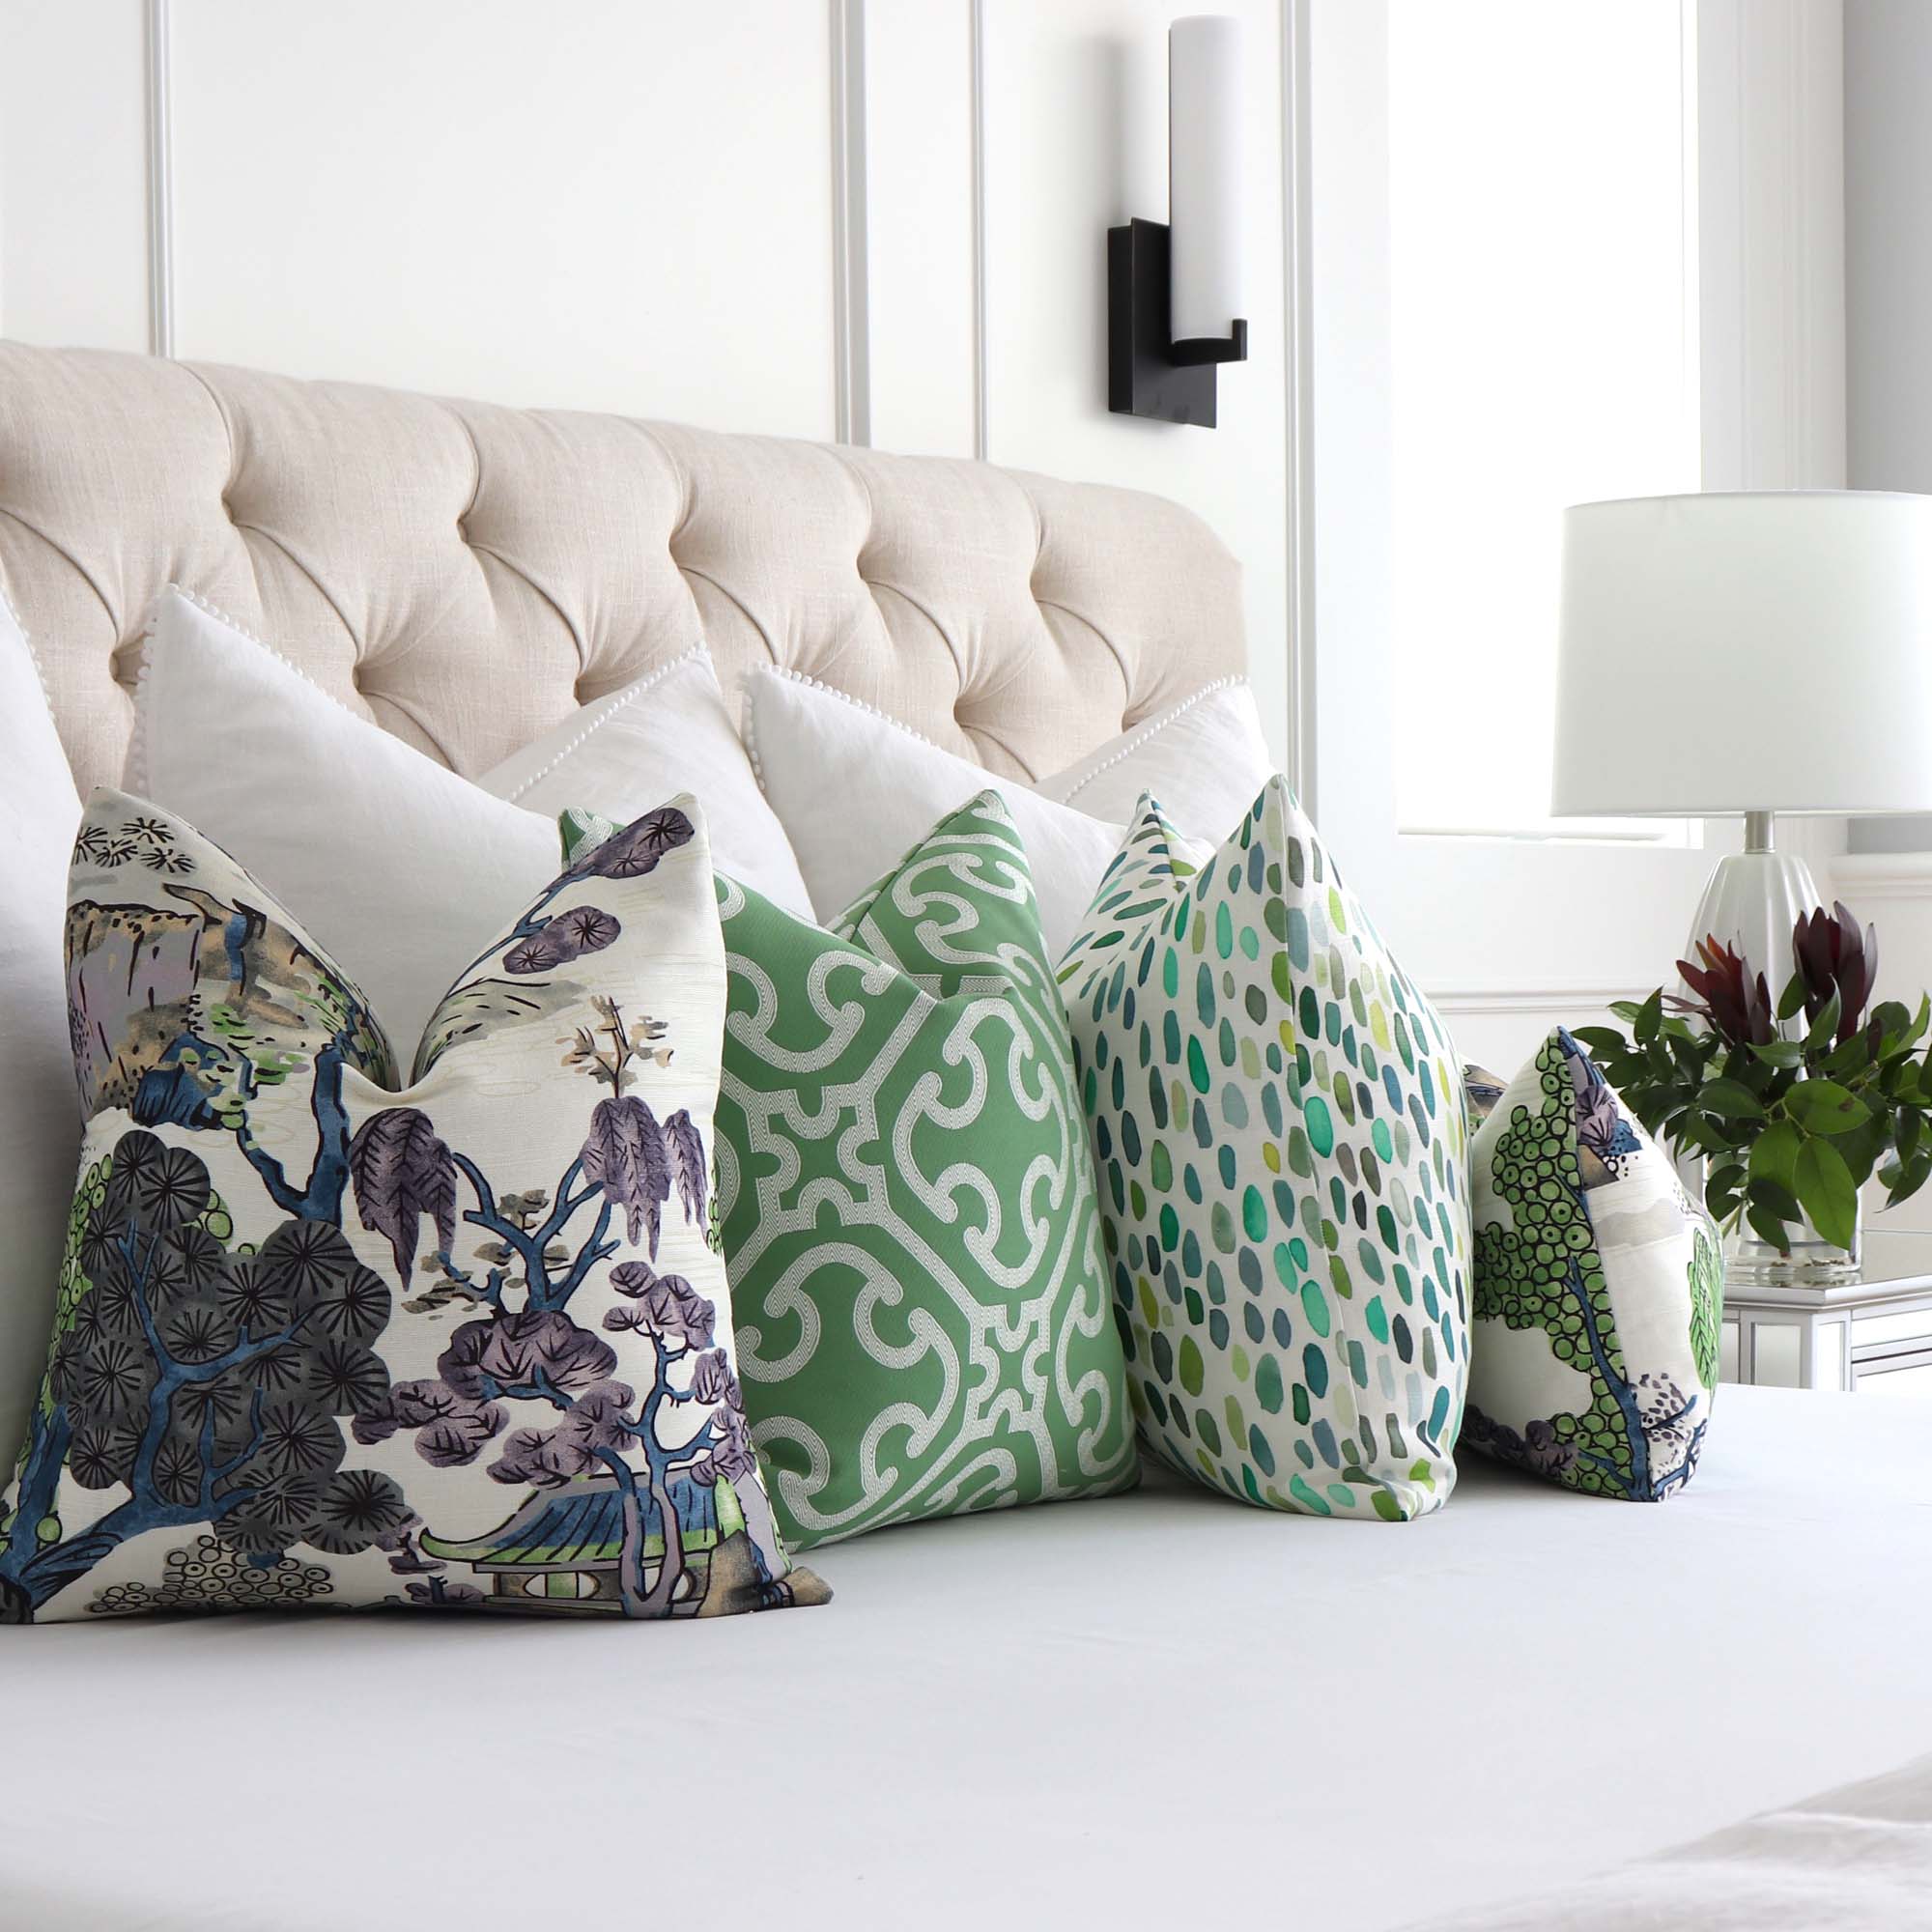 Pillows & Throws, Decor, Products